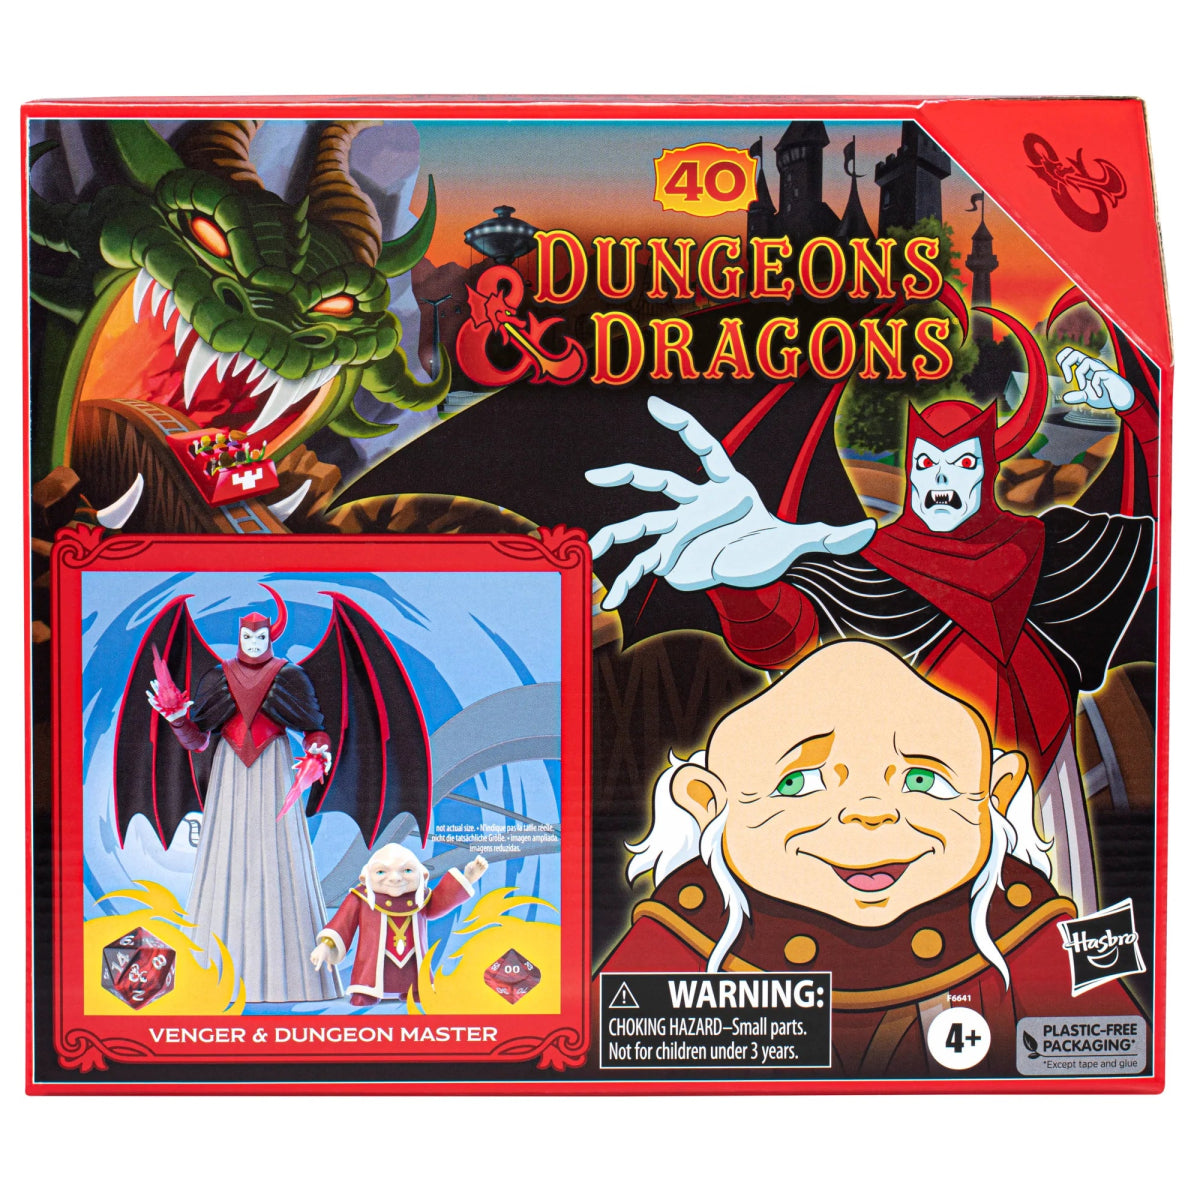 Dungeons & Dragons Cartoon Classics Scale Dungeon Master & Venger Action Figures 2pk (Target Exclusive)